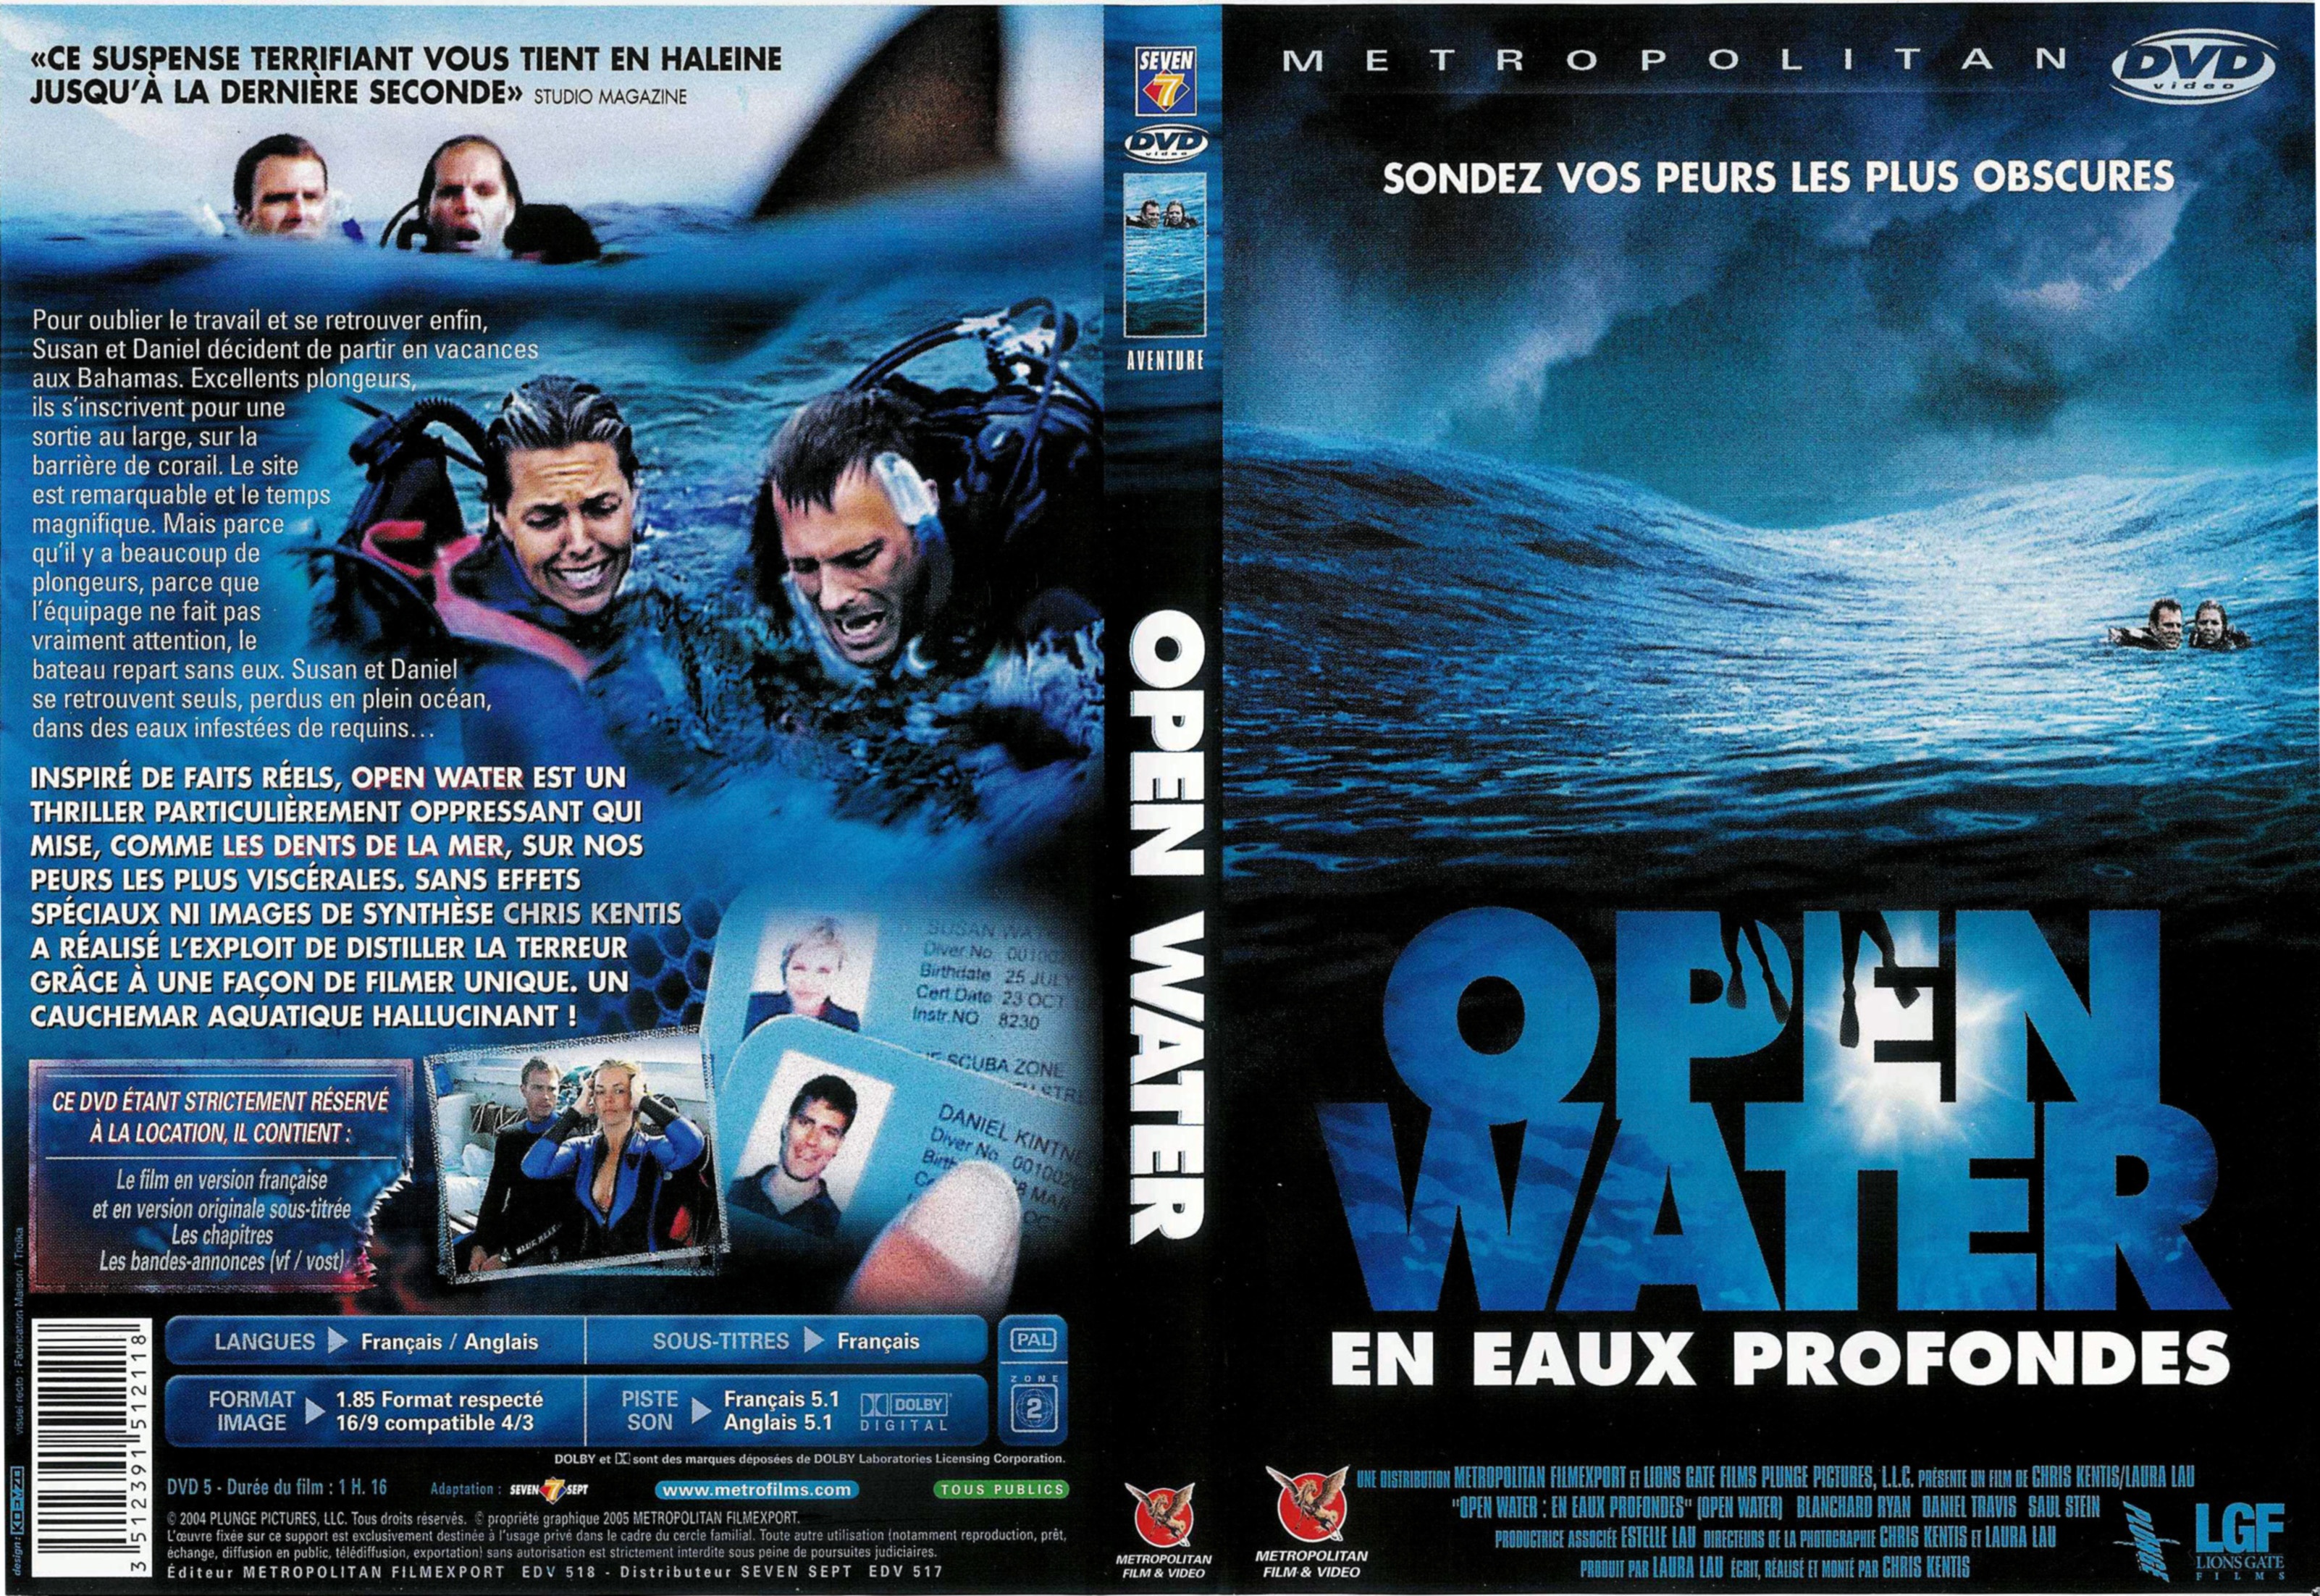 Jaquette DVD Open water v2